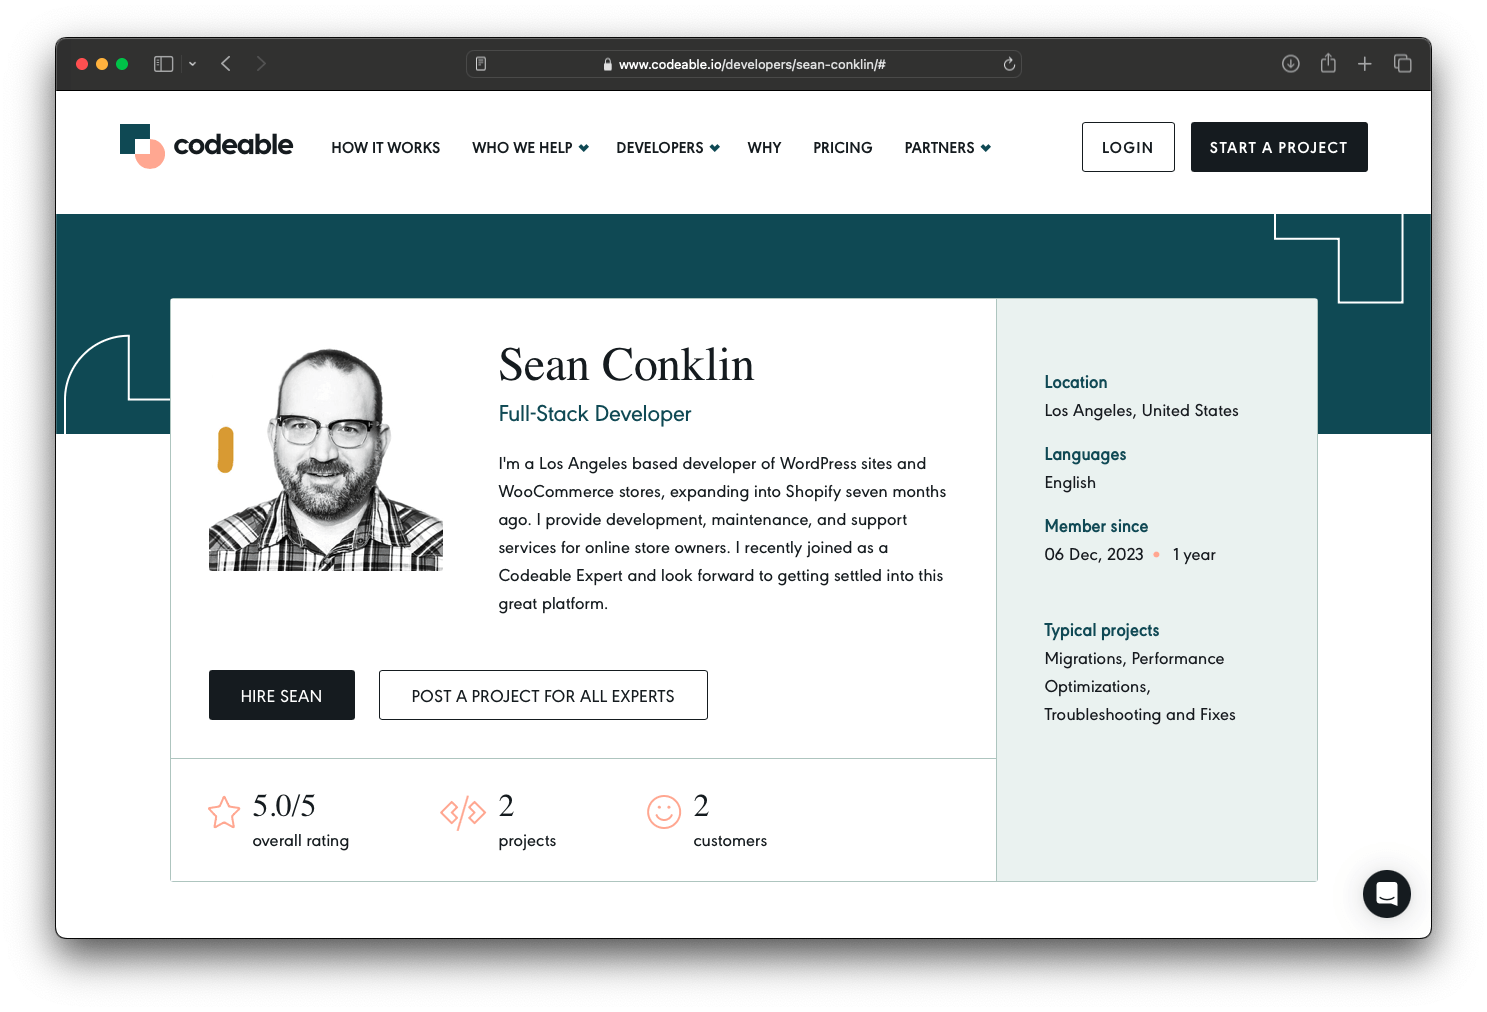 Screenshot of Codeable developer profile: Sean Conklin, Full-Stack Developer. I'm a Los Angeles based developer of WordPress sites and WooCommerce stores, expanding into Shopify seven months ago. I provide development, maintenance, and support services for online store owners. I recently joined as a Codeable Expert and look forward to getting settled into this great platform.